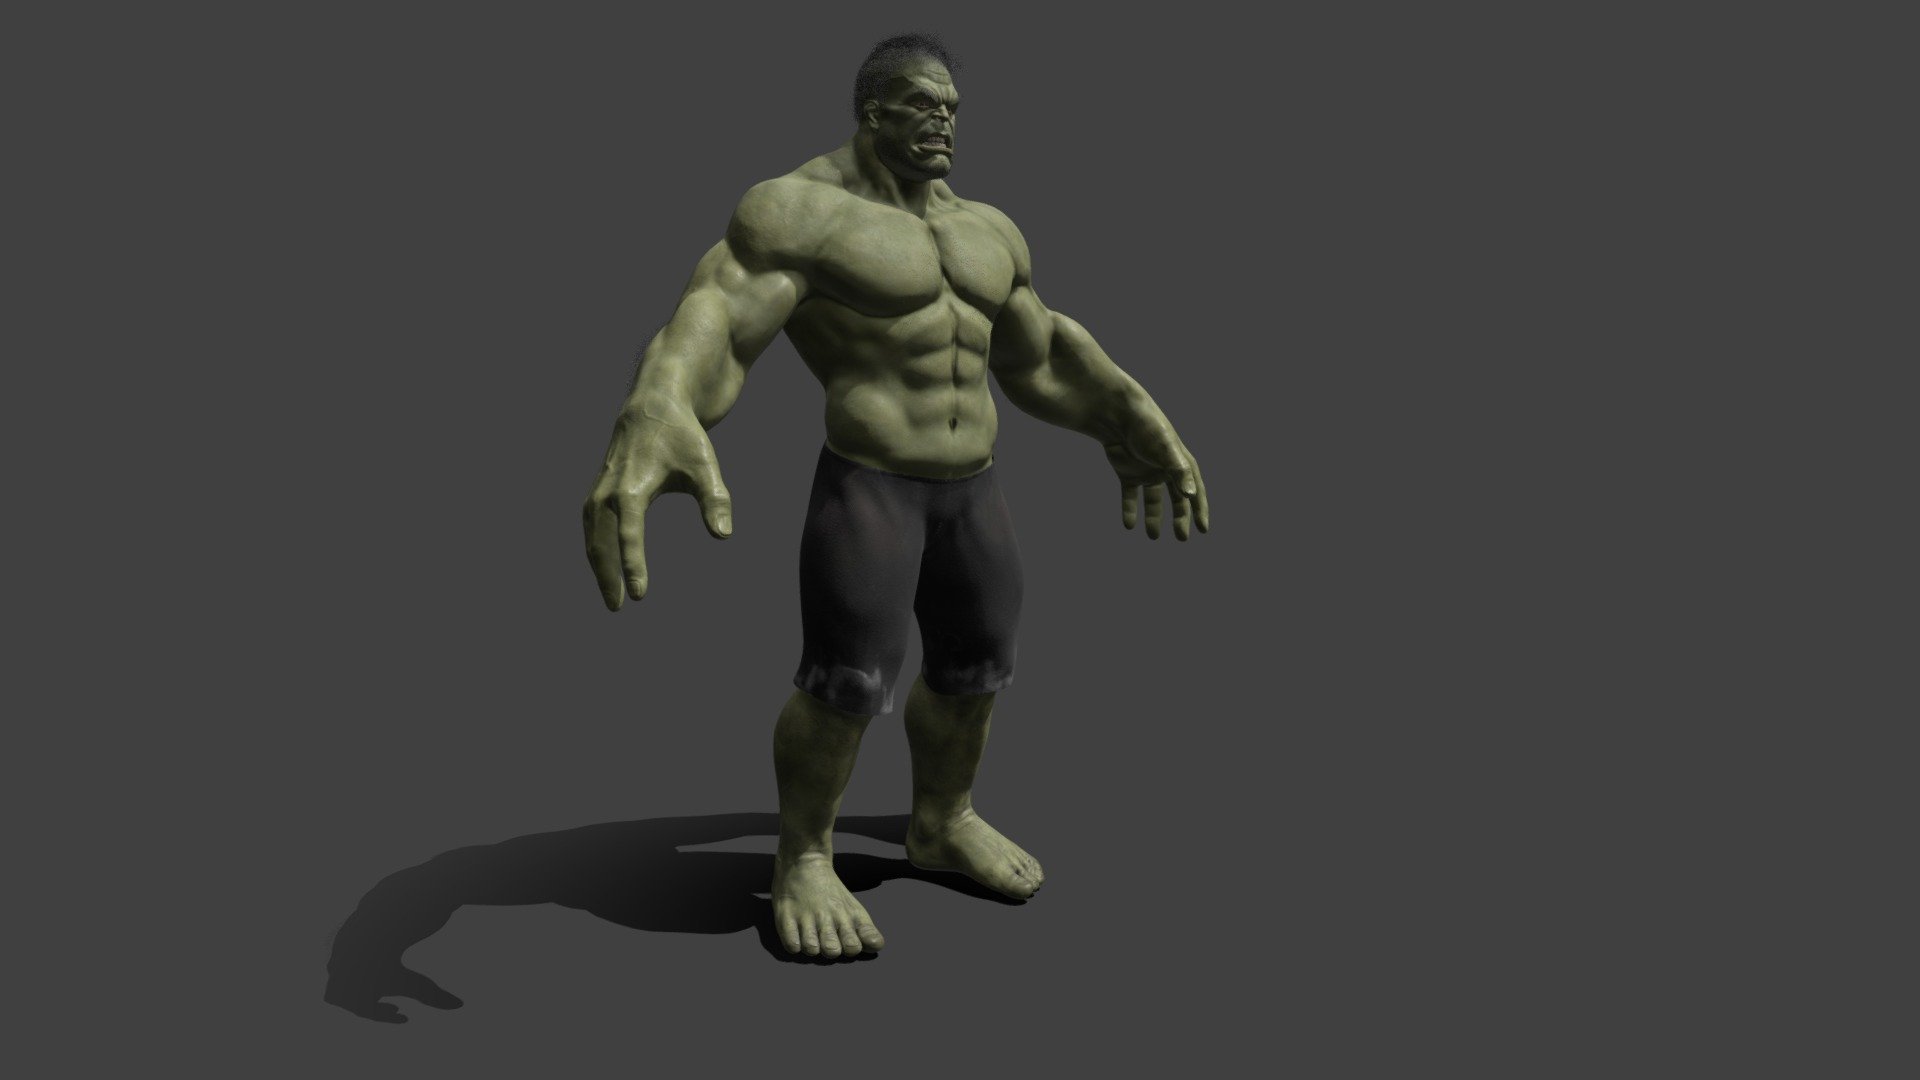 Hope u like it! ^^
Contact me if you want to outsource 3D for Game or Film

Fanpage      https://www.facebook.com/CG3D.Artists/
Website       cg3d.com.vn
Email           cg3d.com.vn@gmail.com - Hulk - Buy Royalty Free 3D model by CG3D (@CuongCG) 3d model